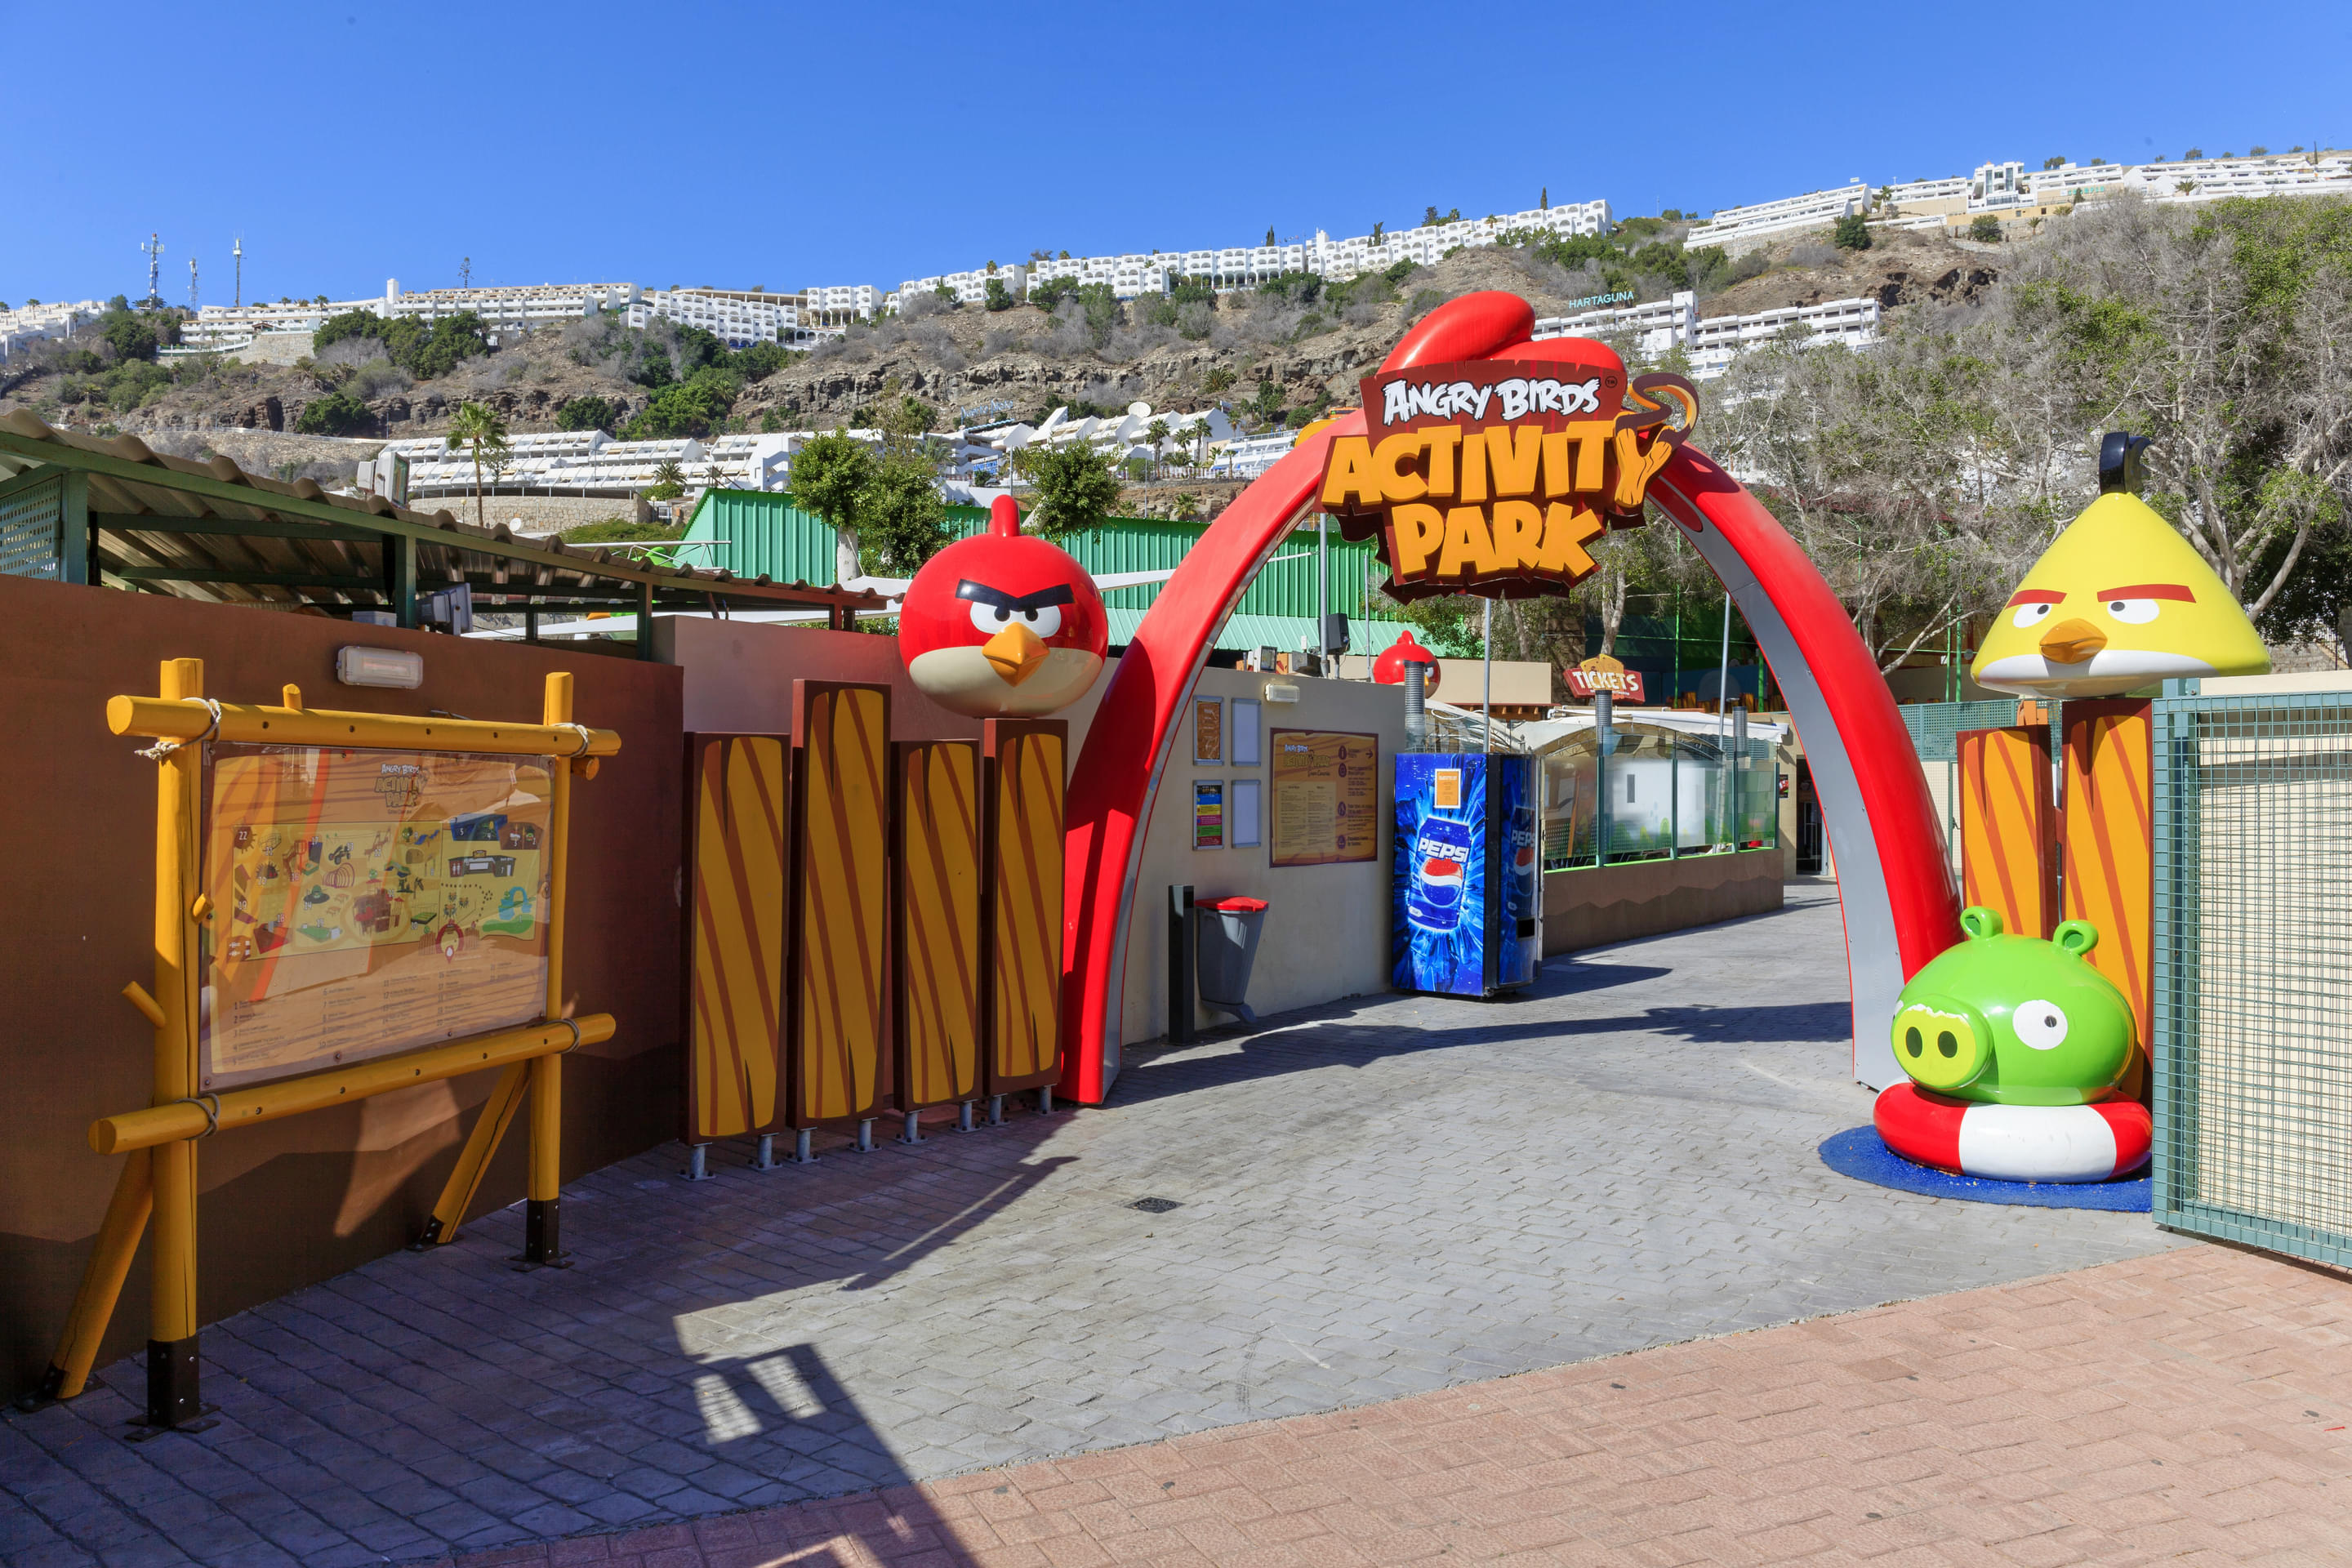 Angry Birds Park Overview